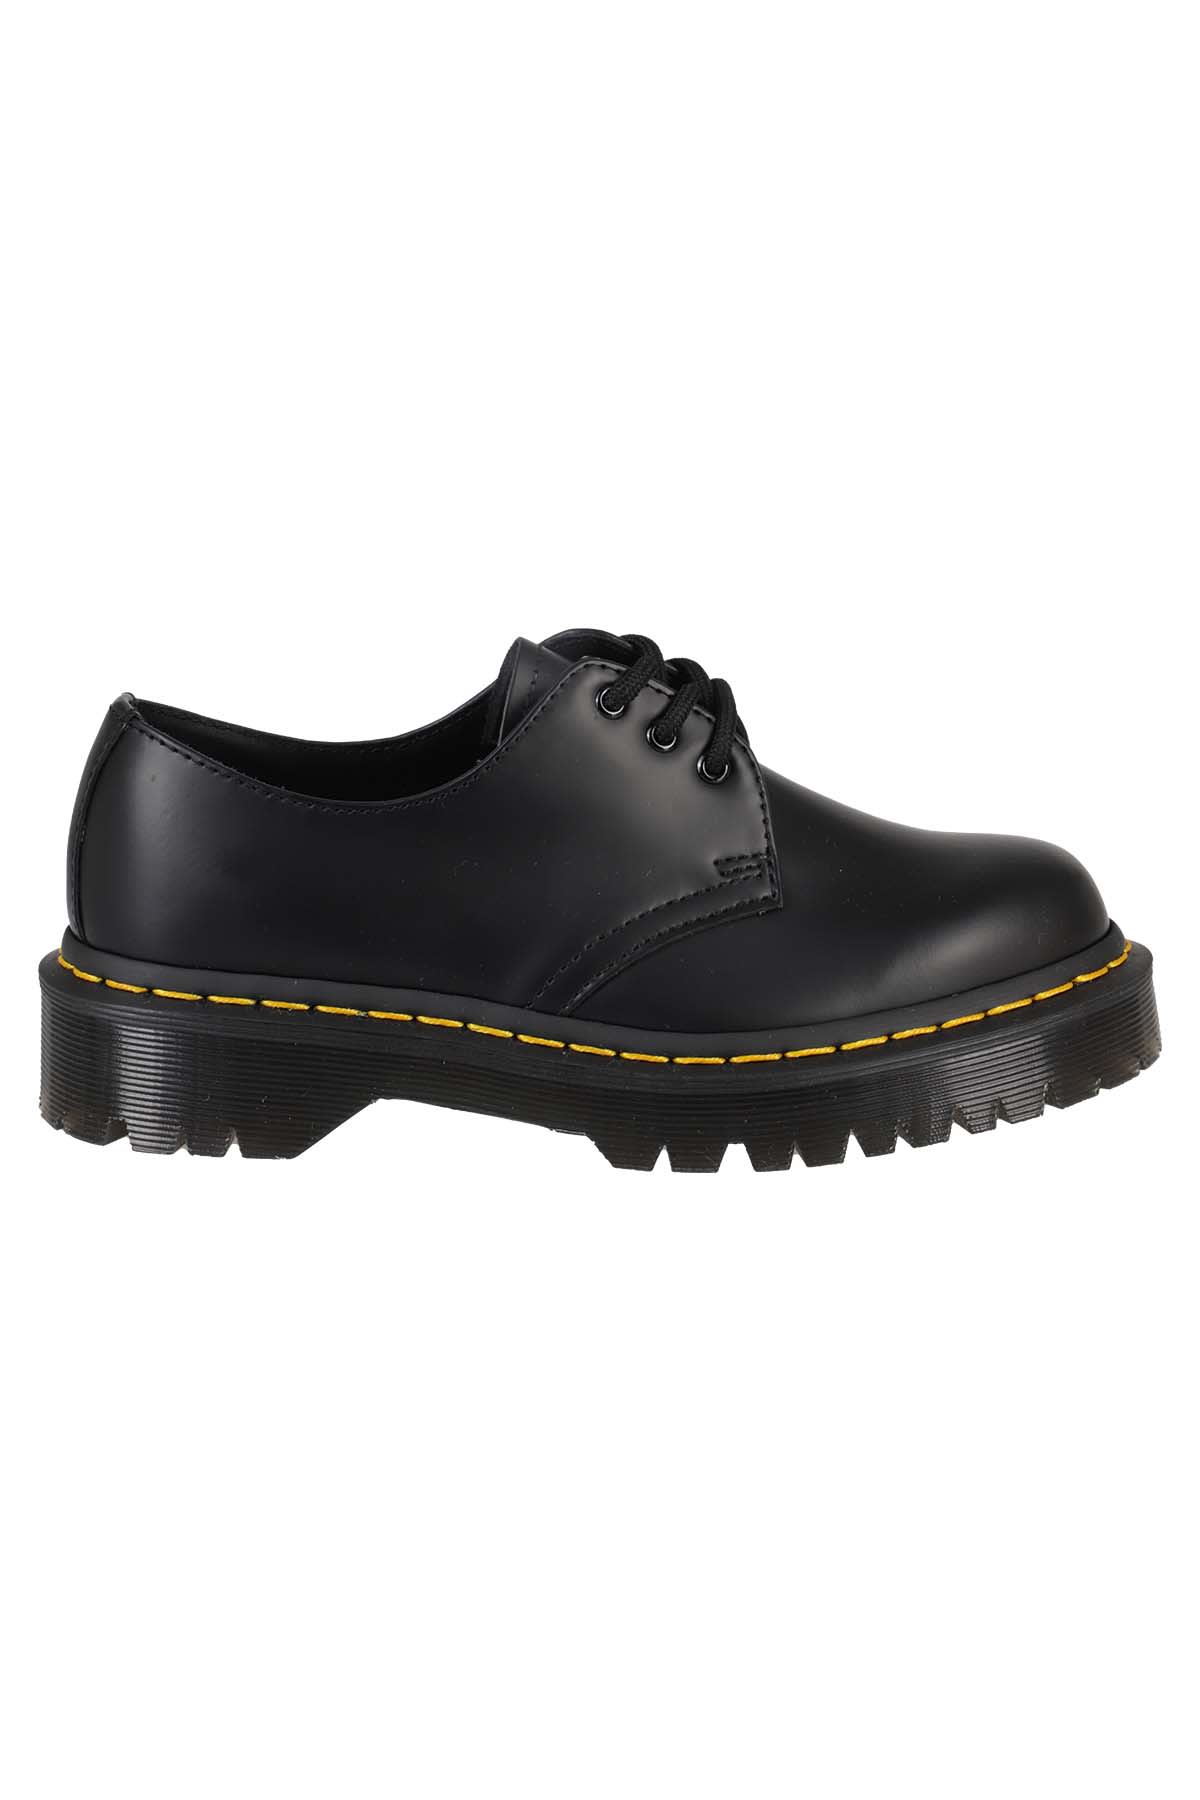 Buy Dr. Martens Laced Shoes online, shop Dr. Martens shoes with free shipping